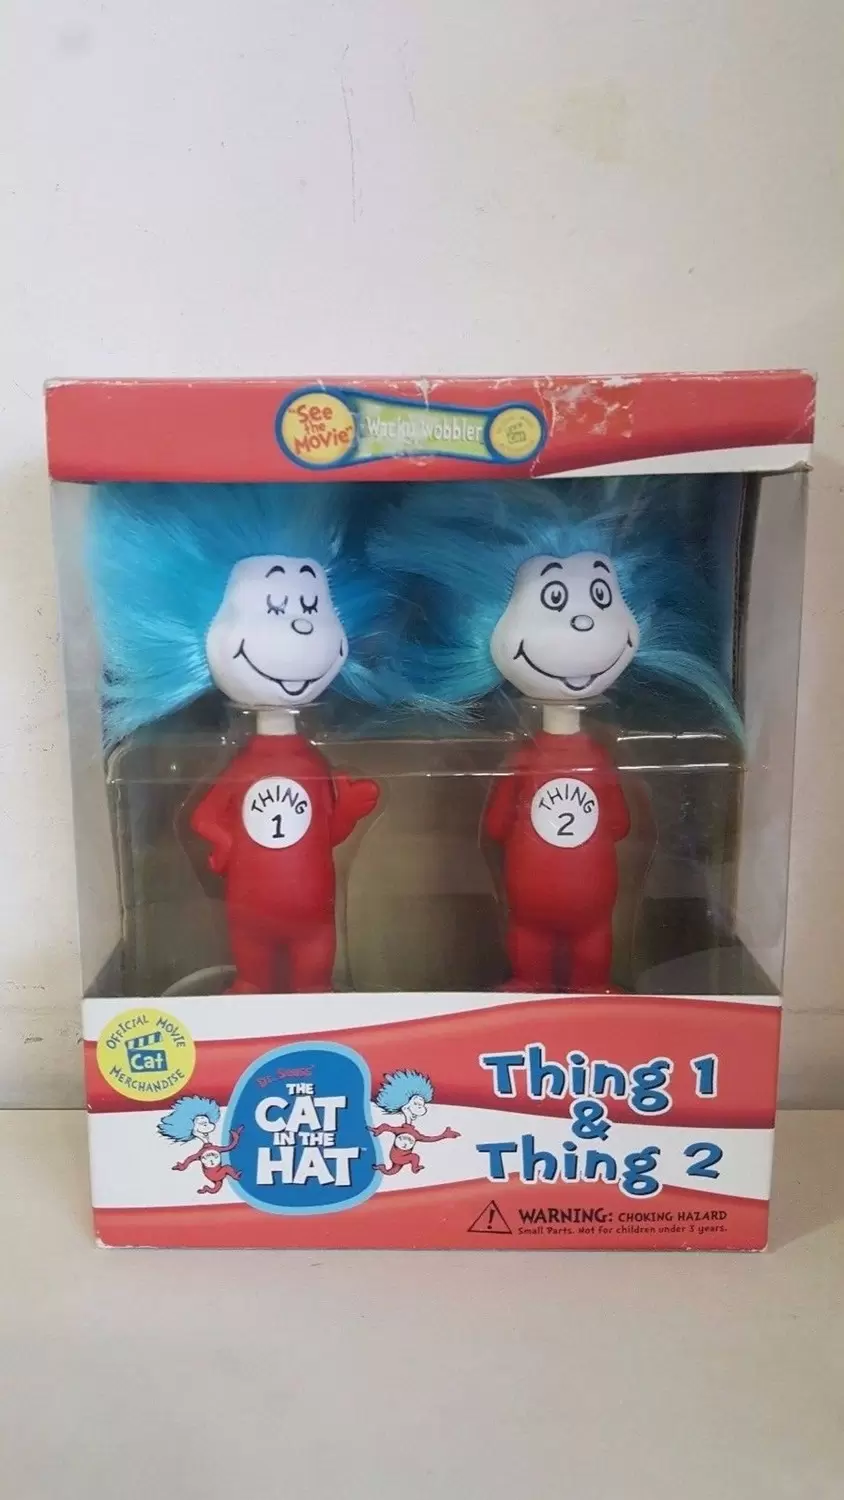 Wacky Wobbler Cartoons - The Cat In the Hat - Thing 1 and Thing 2 2 Pack